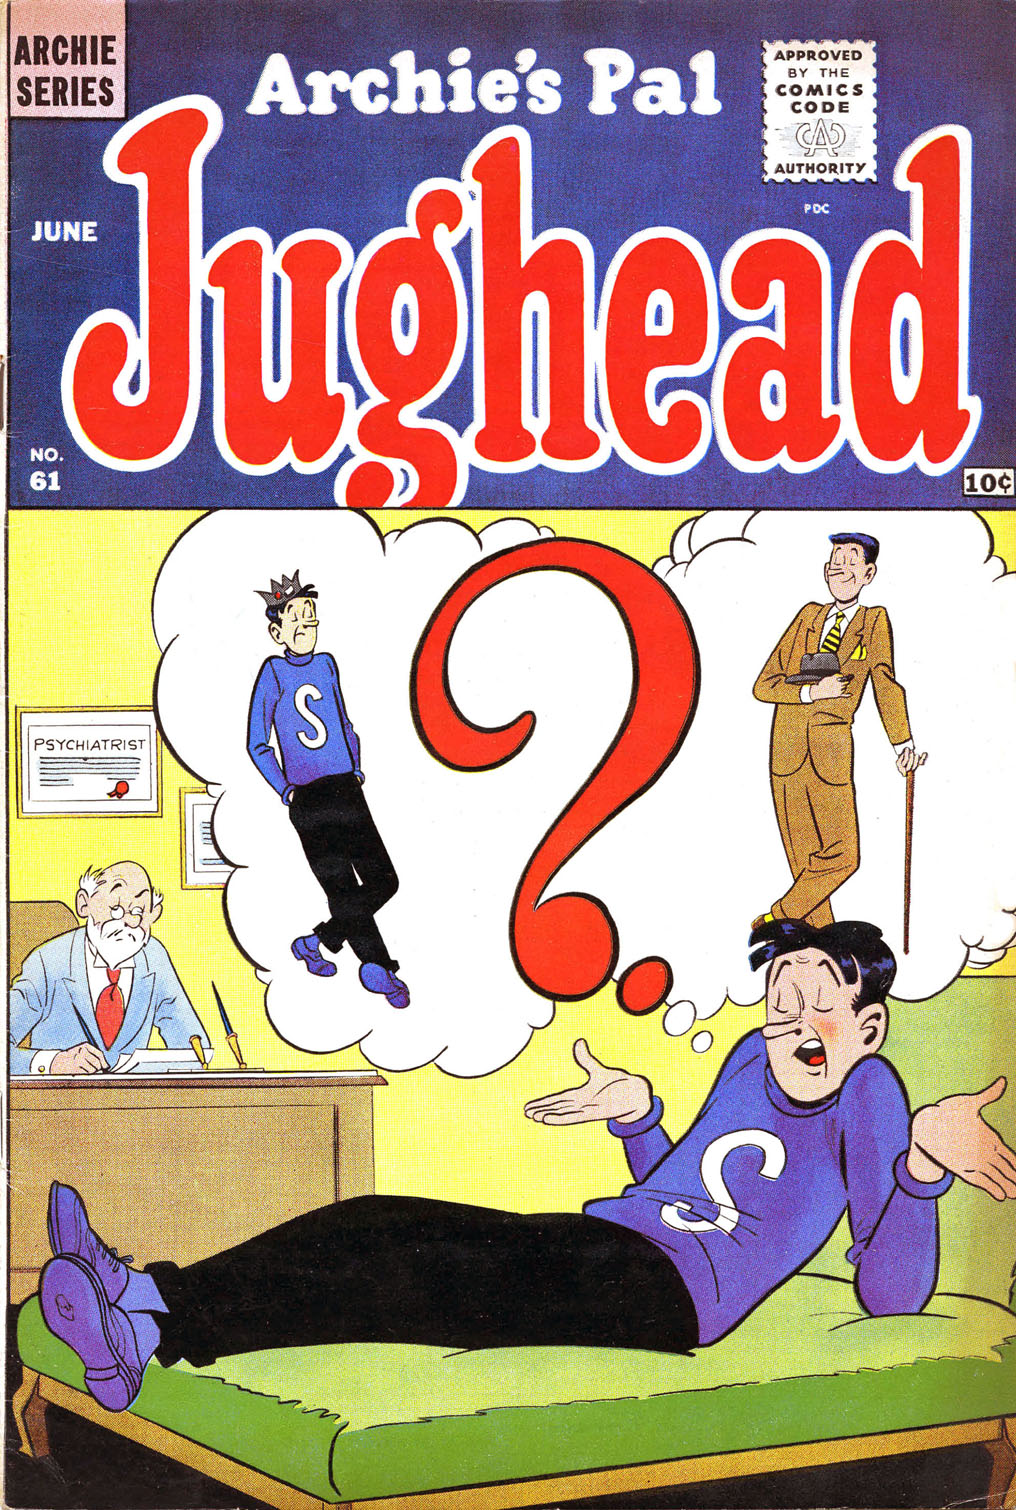 Read online Archie's Pal Jughead comic -  Issue #61 - 1